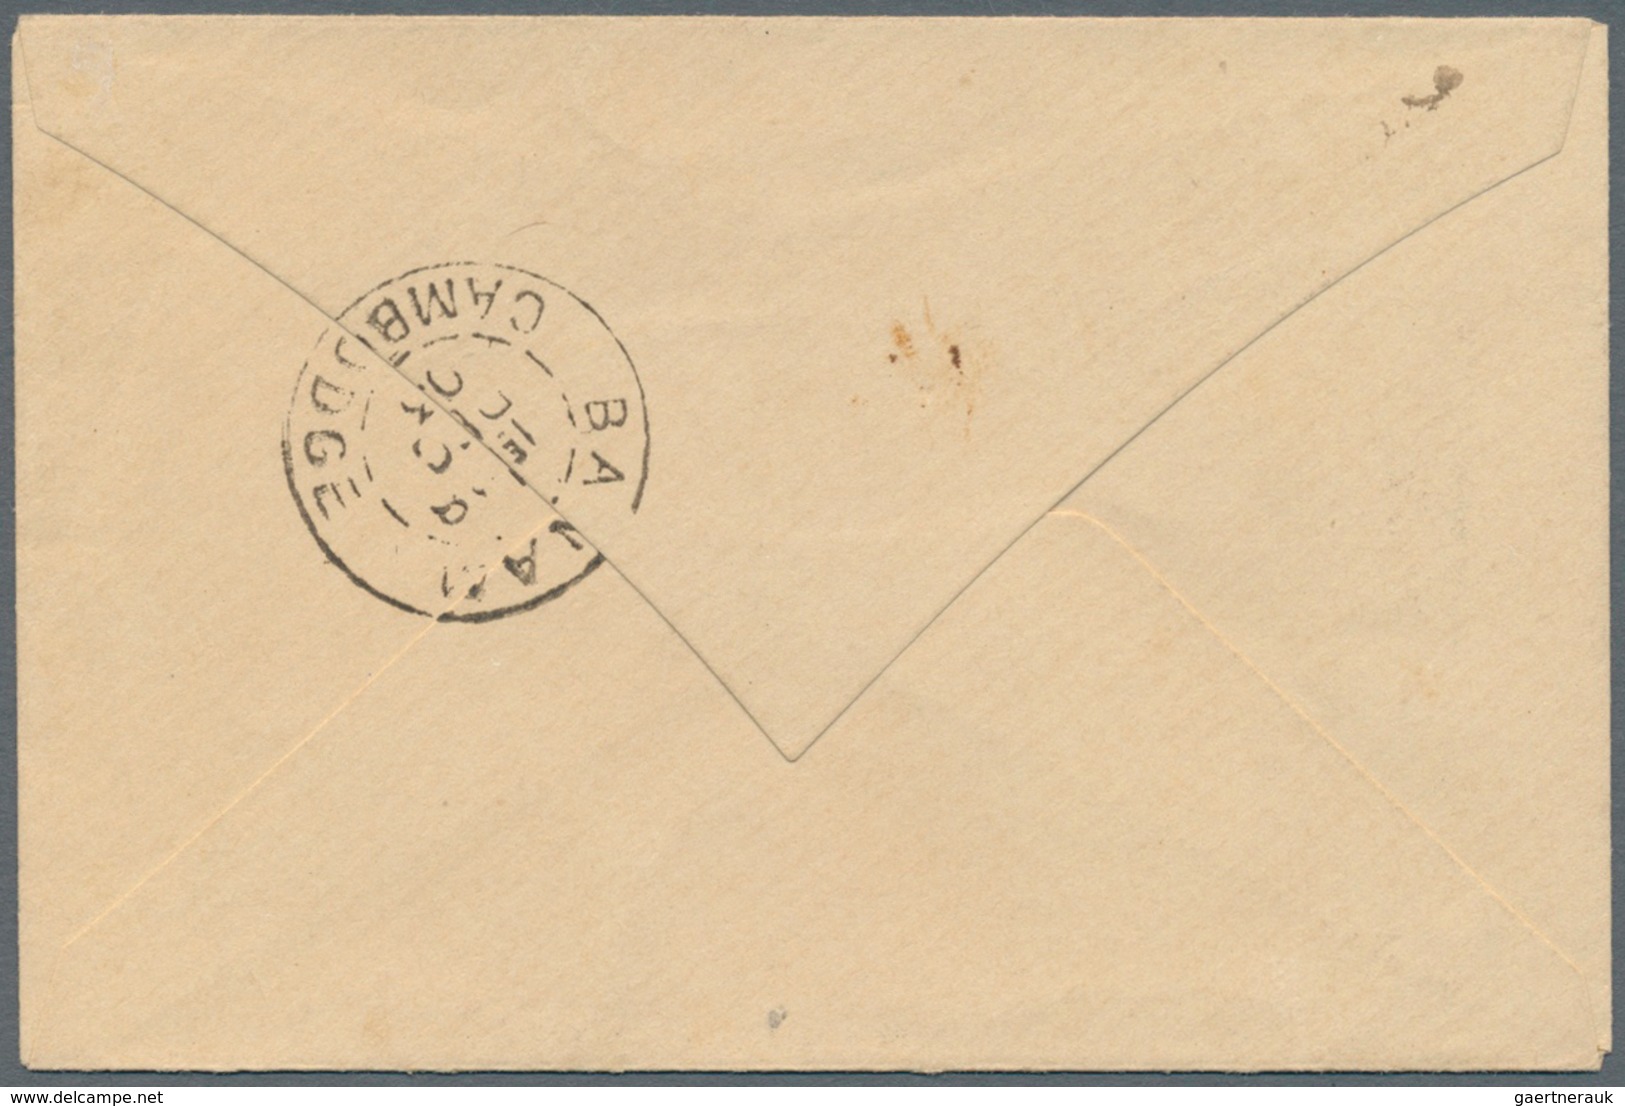 Kambodscha: 1903. French Indo-China Postal Stationery Envelope 5c Yellow- Green Cancelled By Soairie - Kambodscha